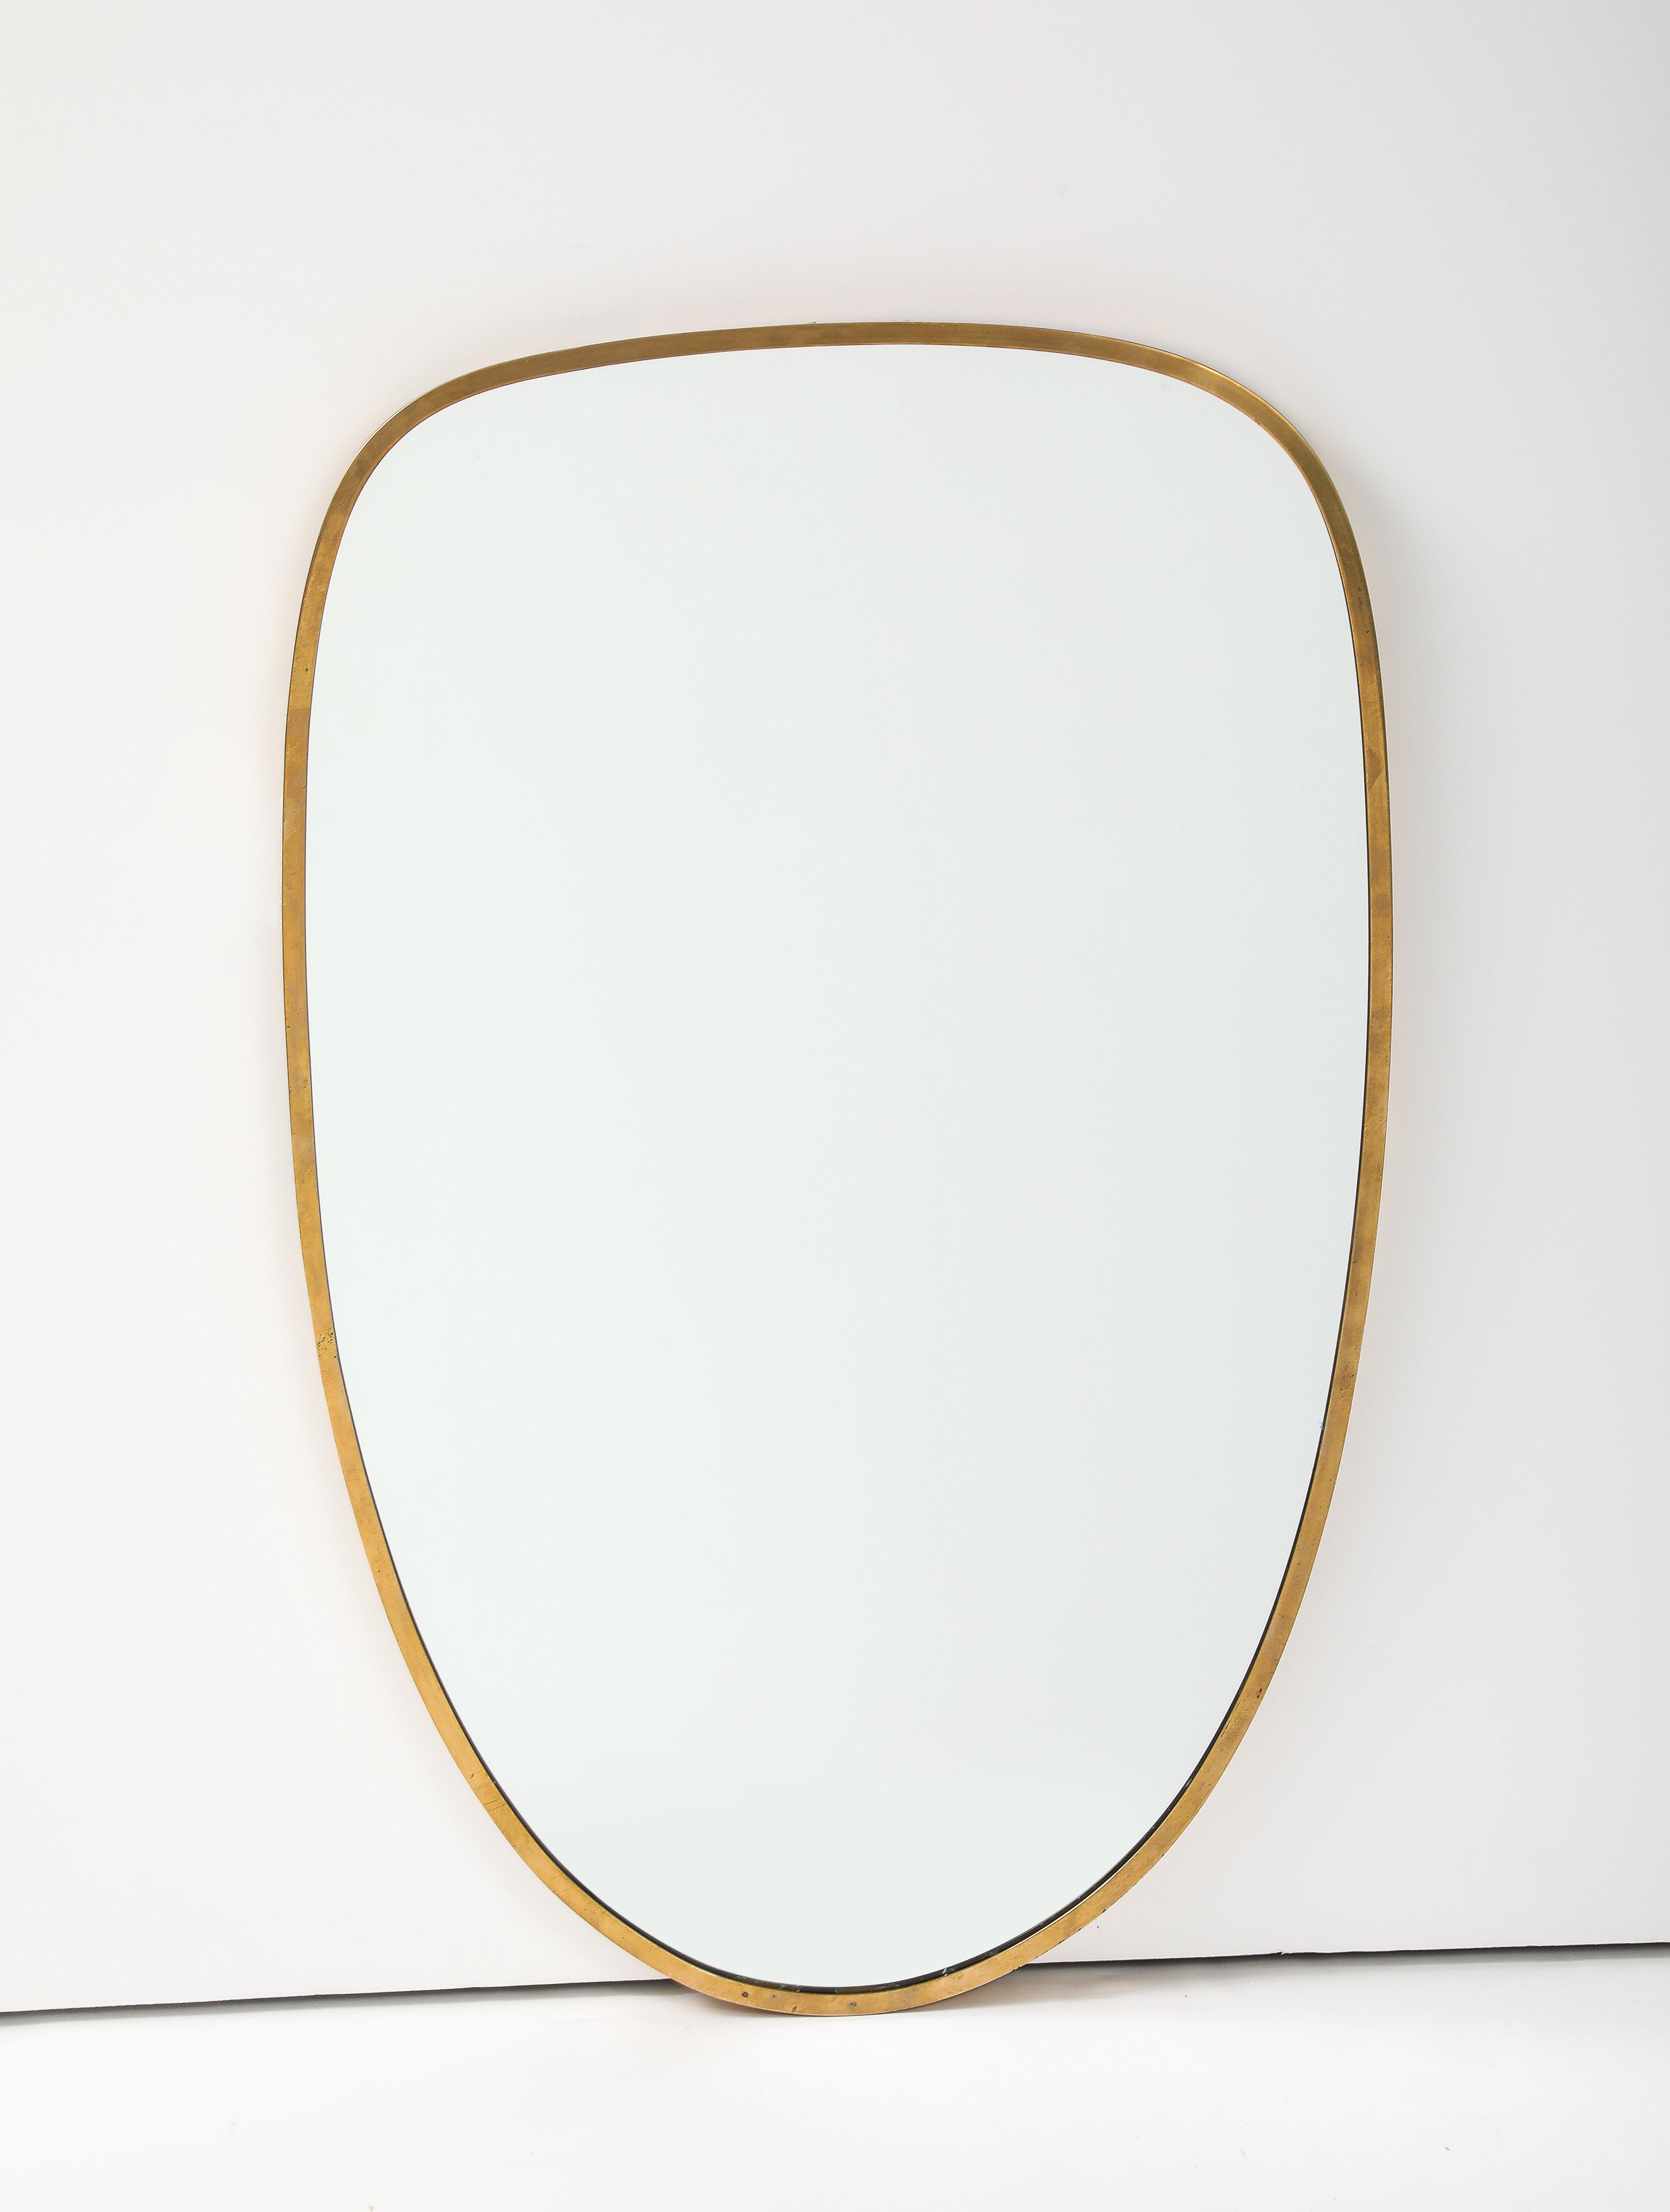 Mid-20th Century Italian Modernist Mirror with Brass Frame, Italy, c. 1950 For Sale